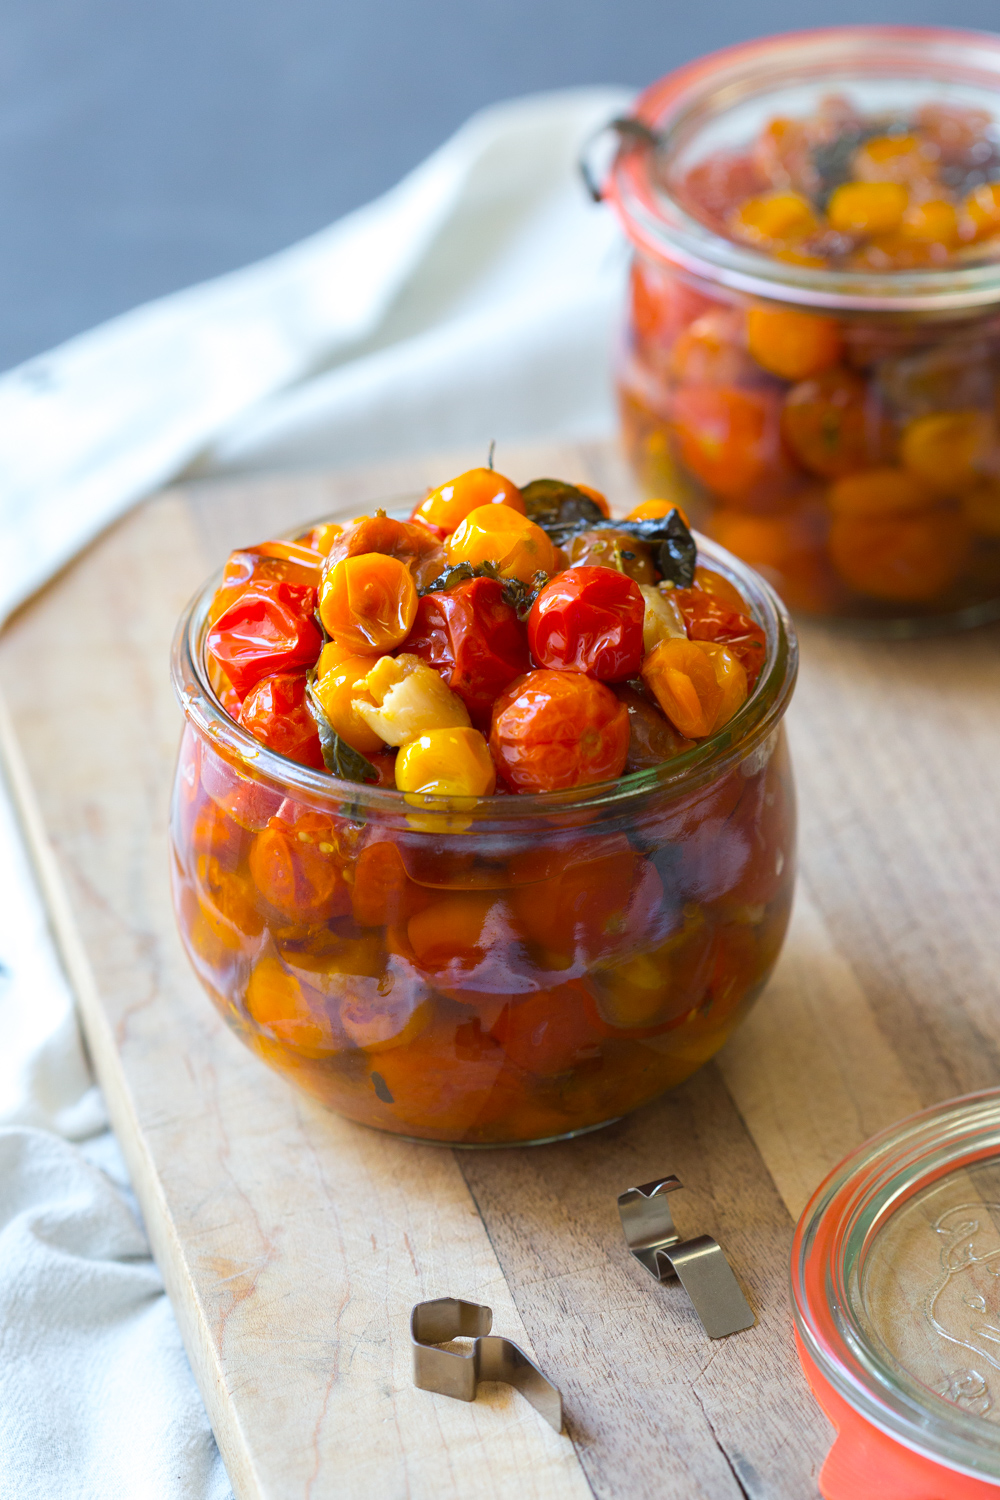 Cherry Tomato Confit in a jar by Baking the Goods